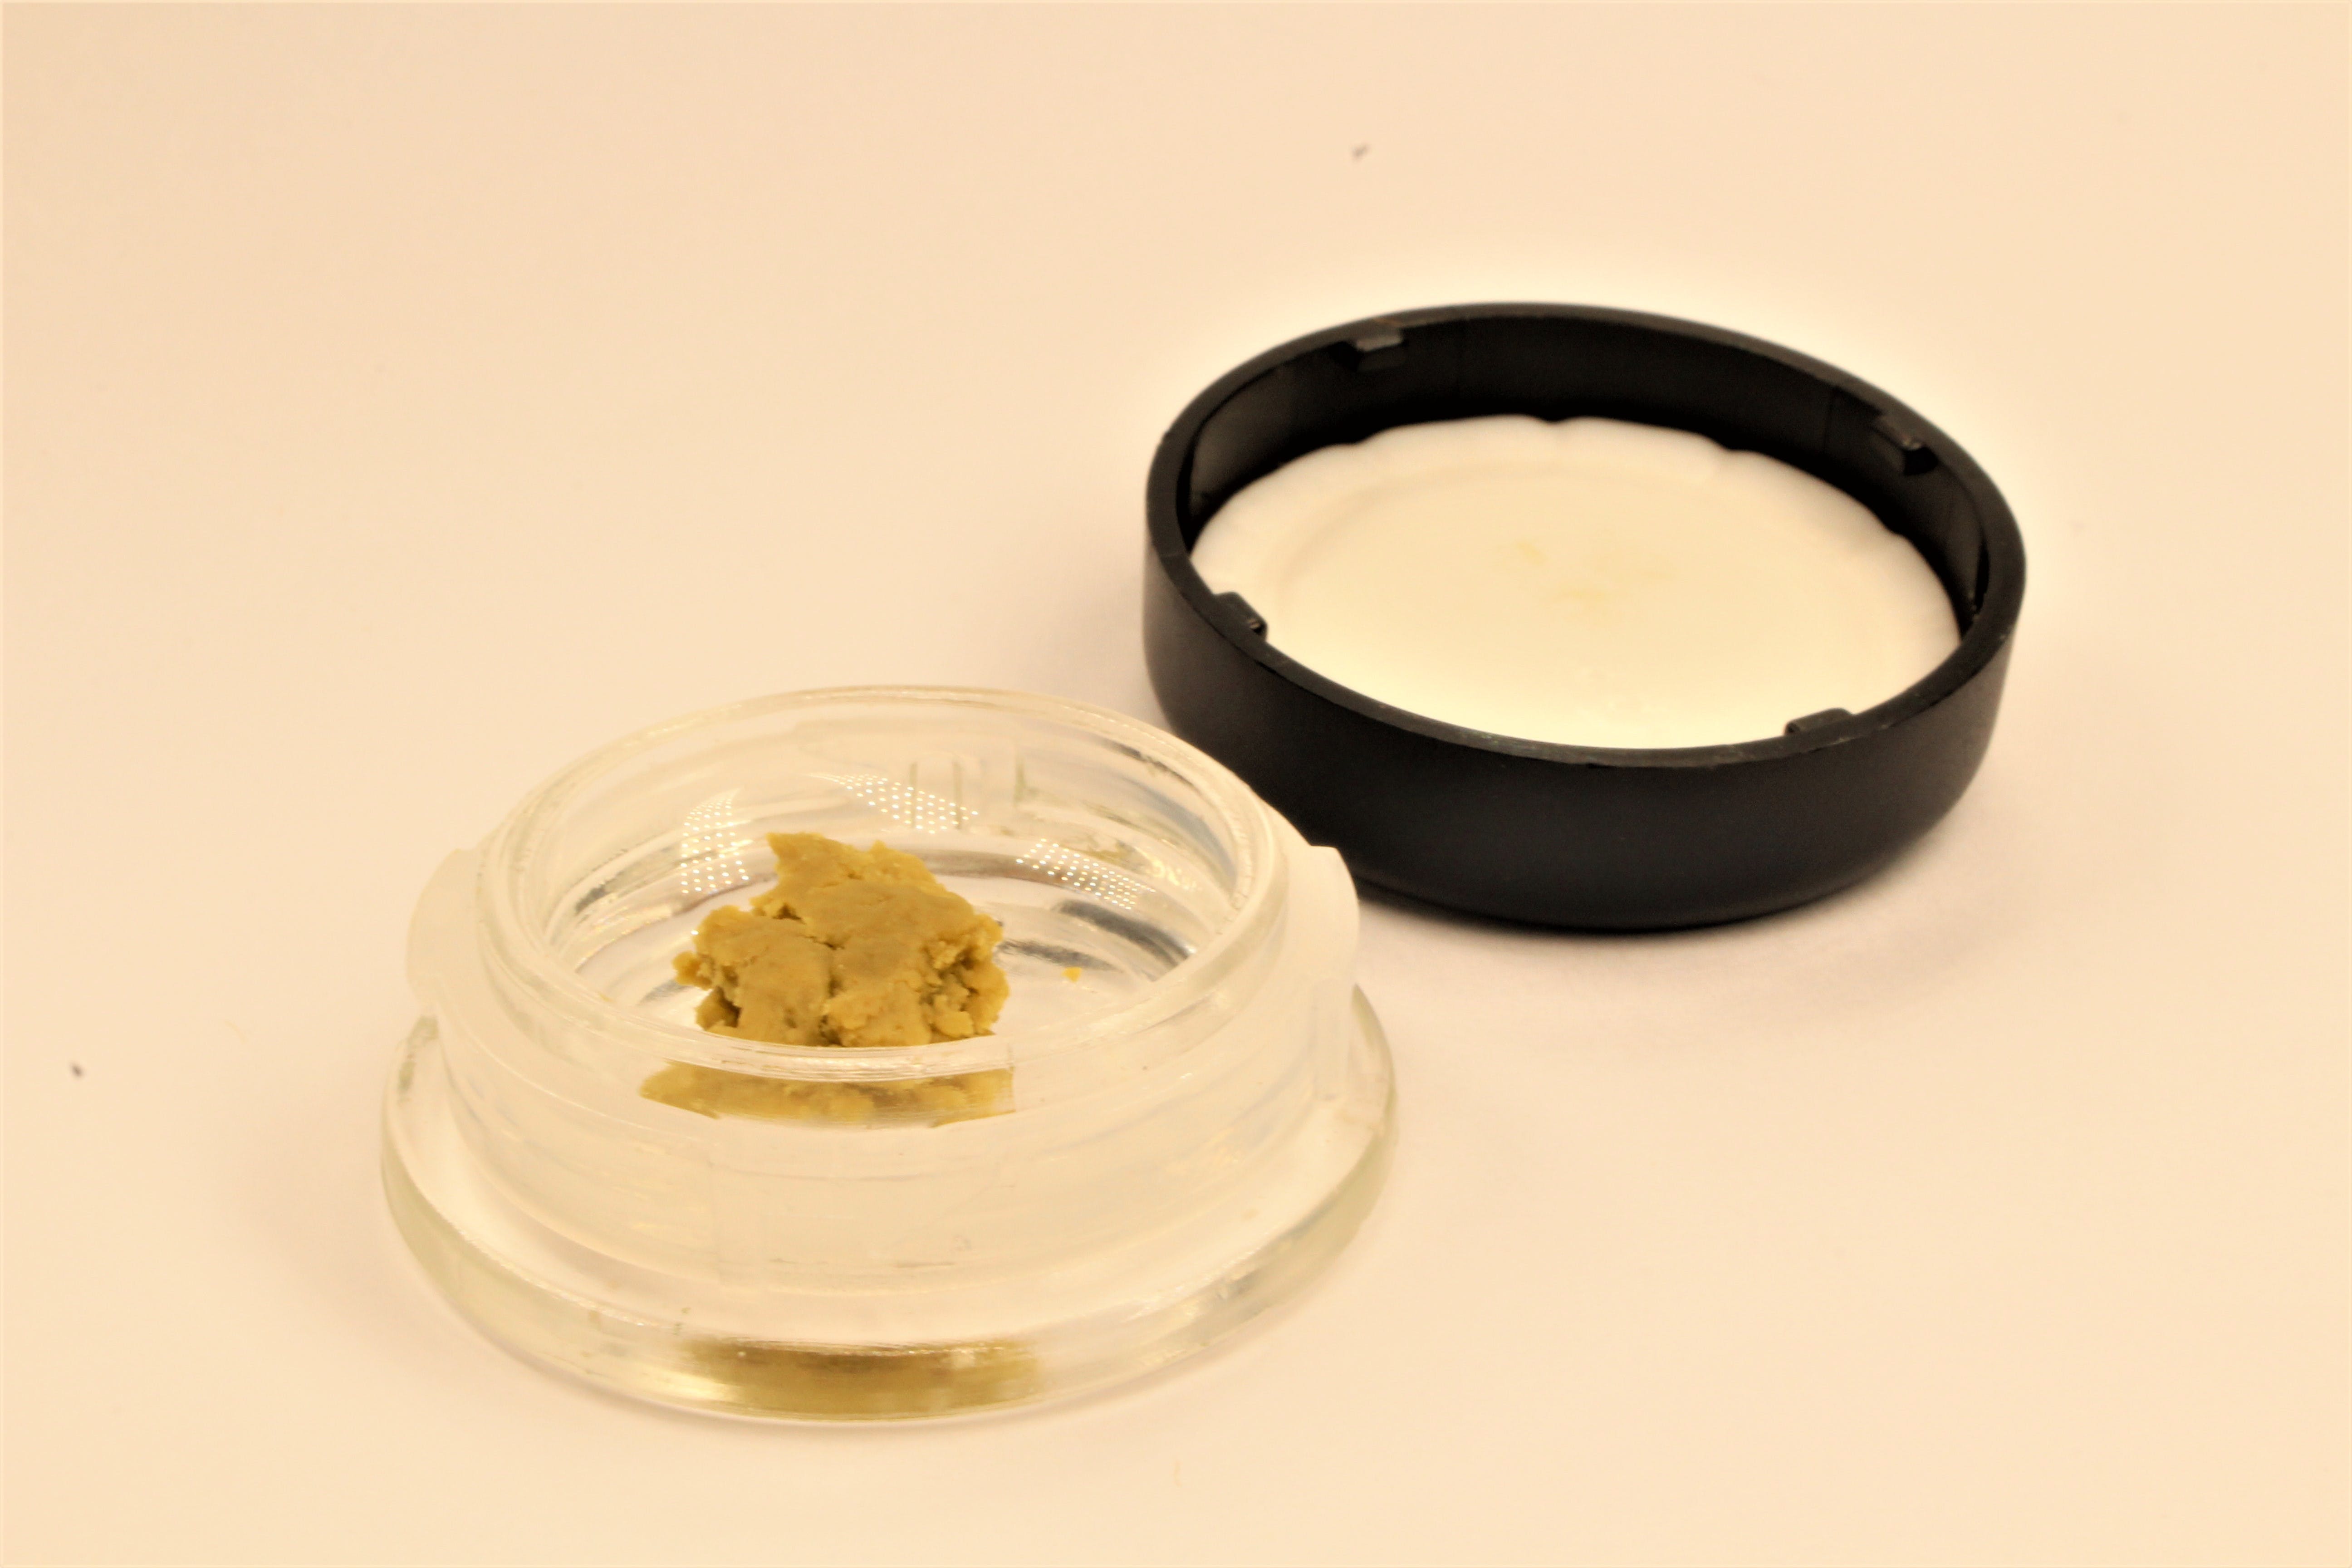 concentrate-kripple-threat-5g-rosin